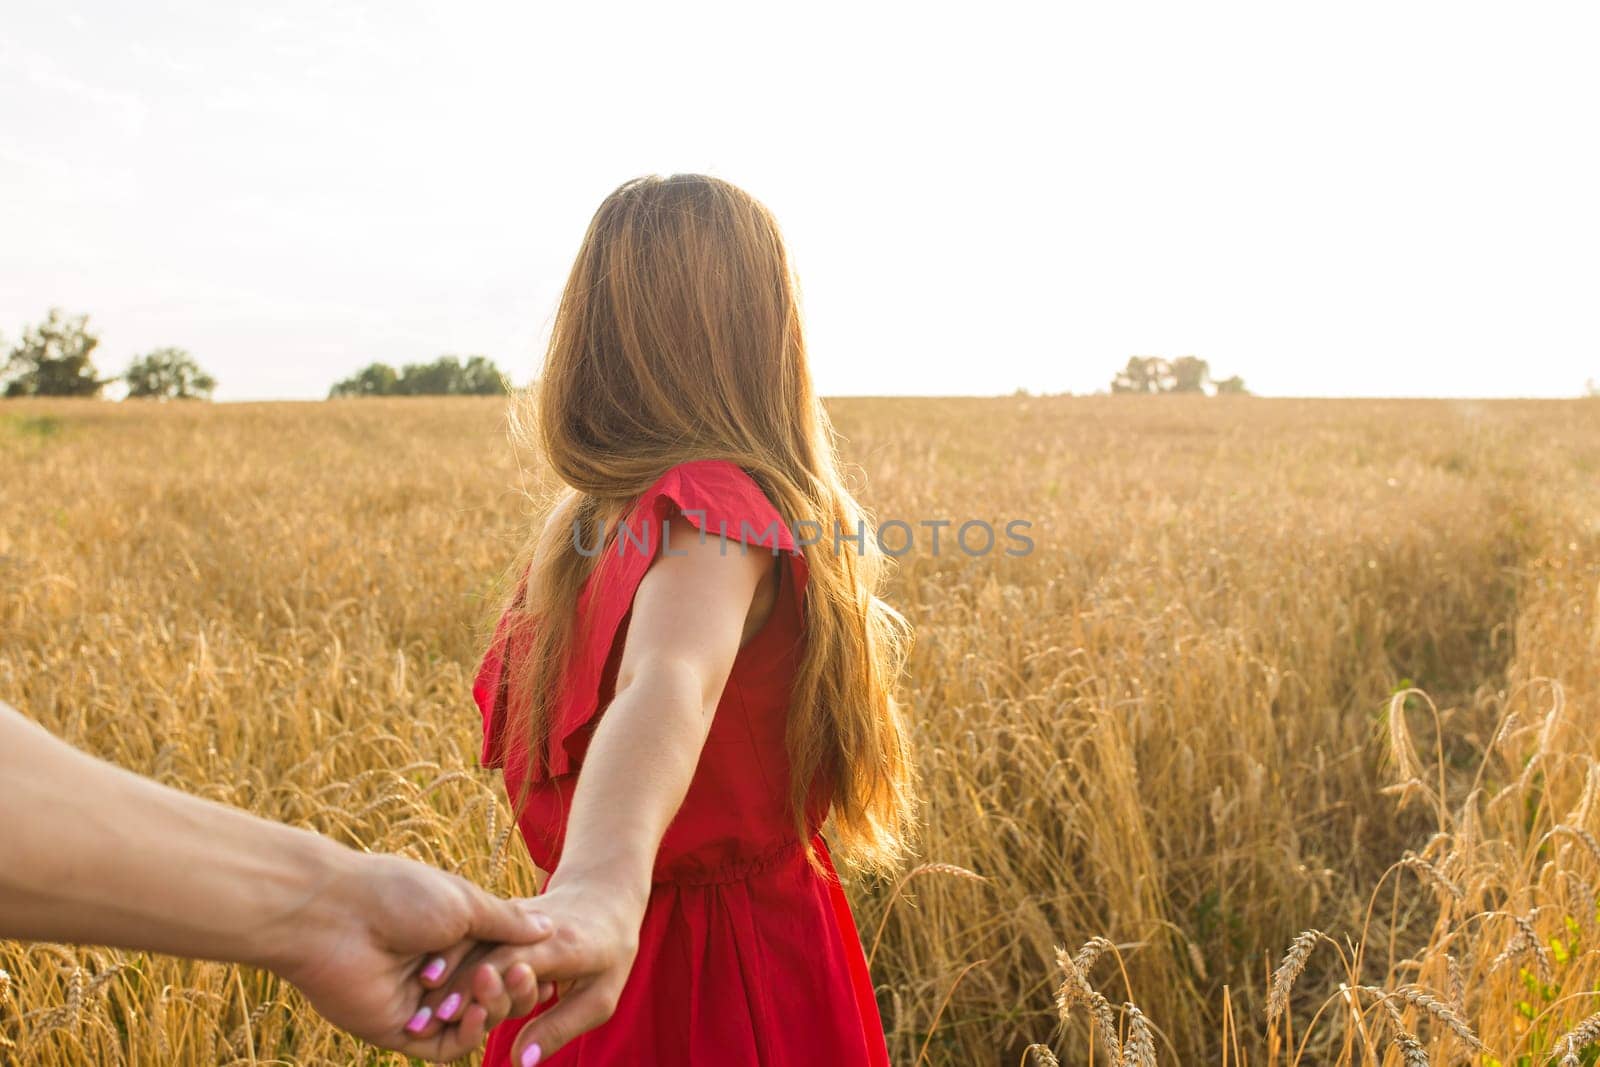 Follow me, Beautiful young woman holds the hand of man in a wheat field by Satura86